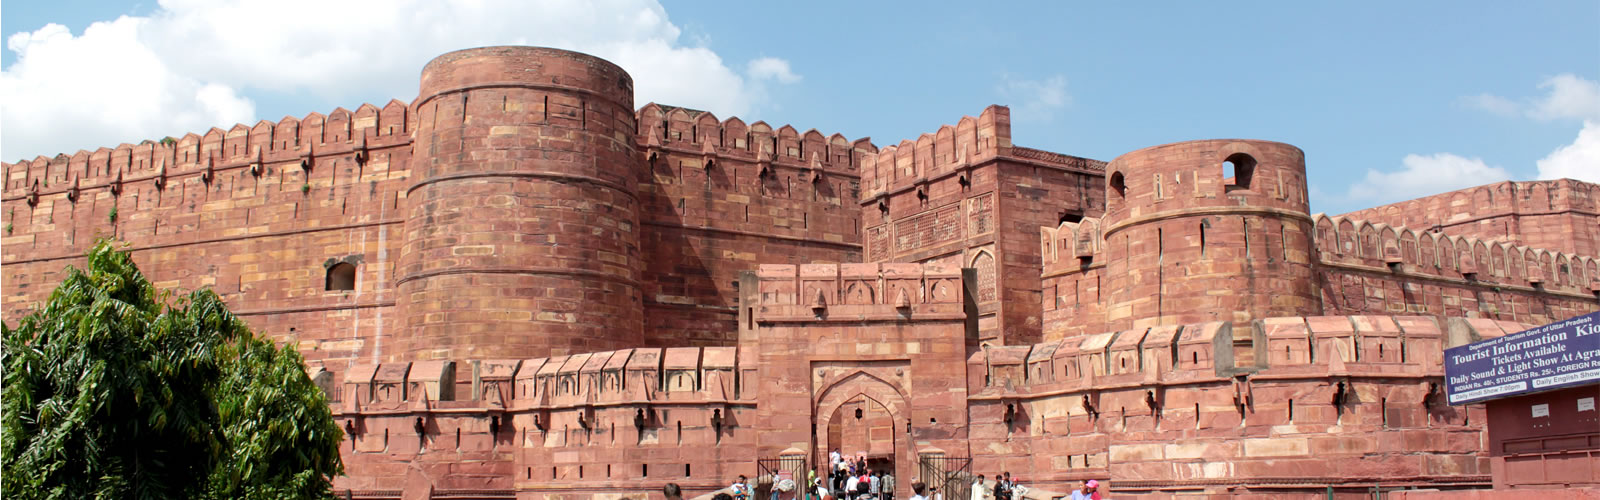 Agra Fort #7